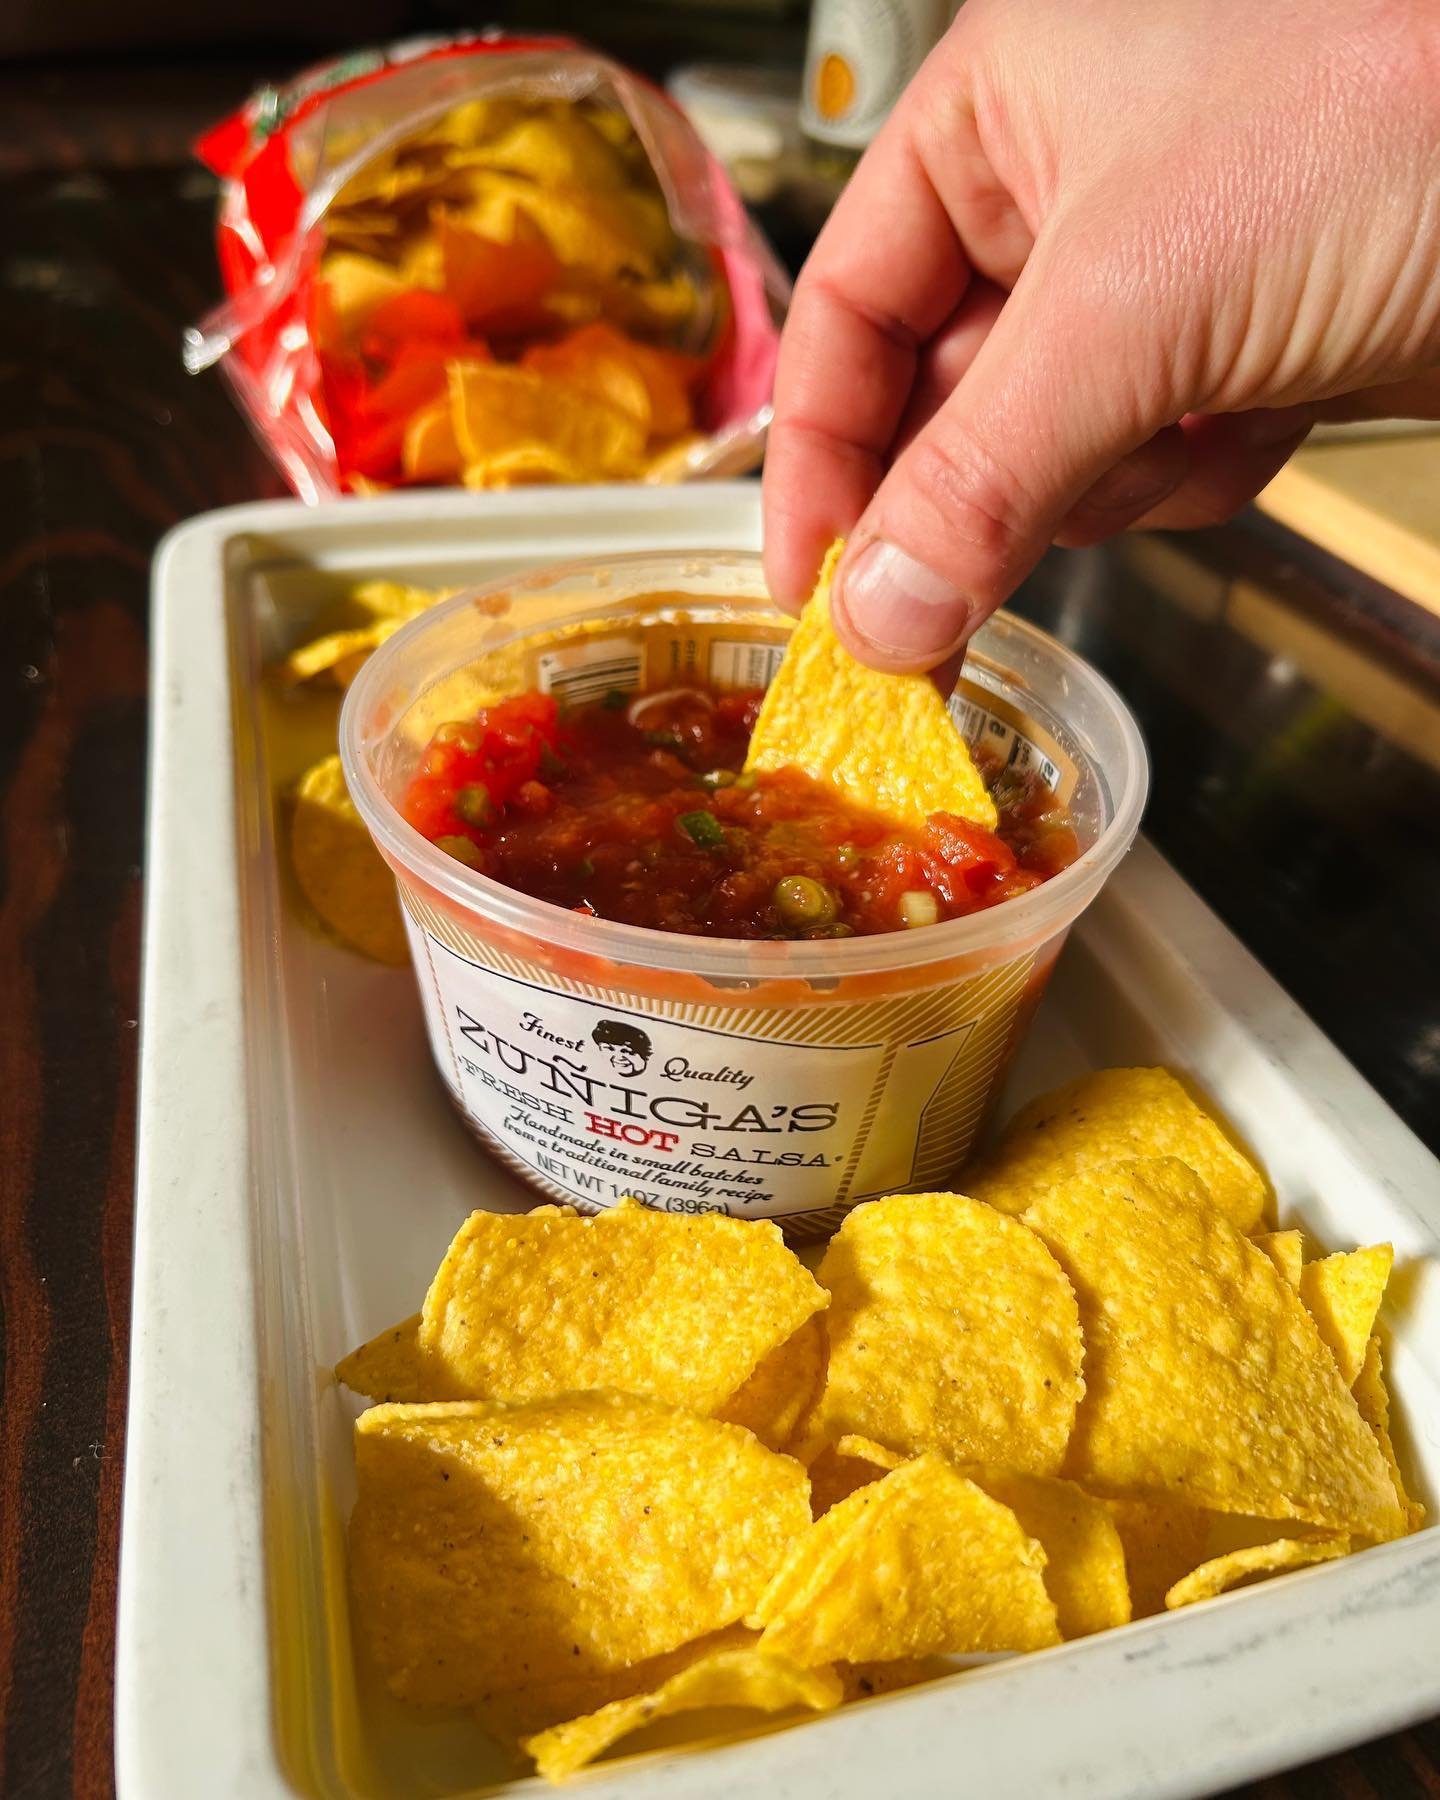 Cinco De Mayo is THIS SUNDAY- and we&rsquo;re ready to party! 🎉 We&rsquo;re fully stocked at both locations with all your favorite local and classic brands of chips, guac, salsa, and more! PLUS- we&rsquo;ve got our own fresh house made chips, guac, 